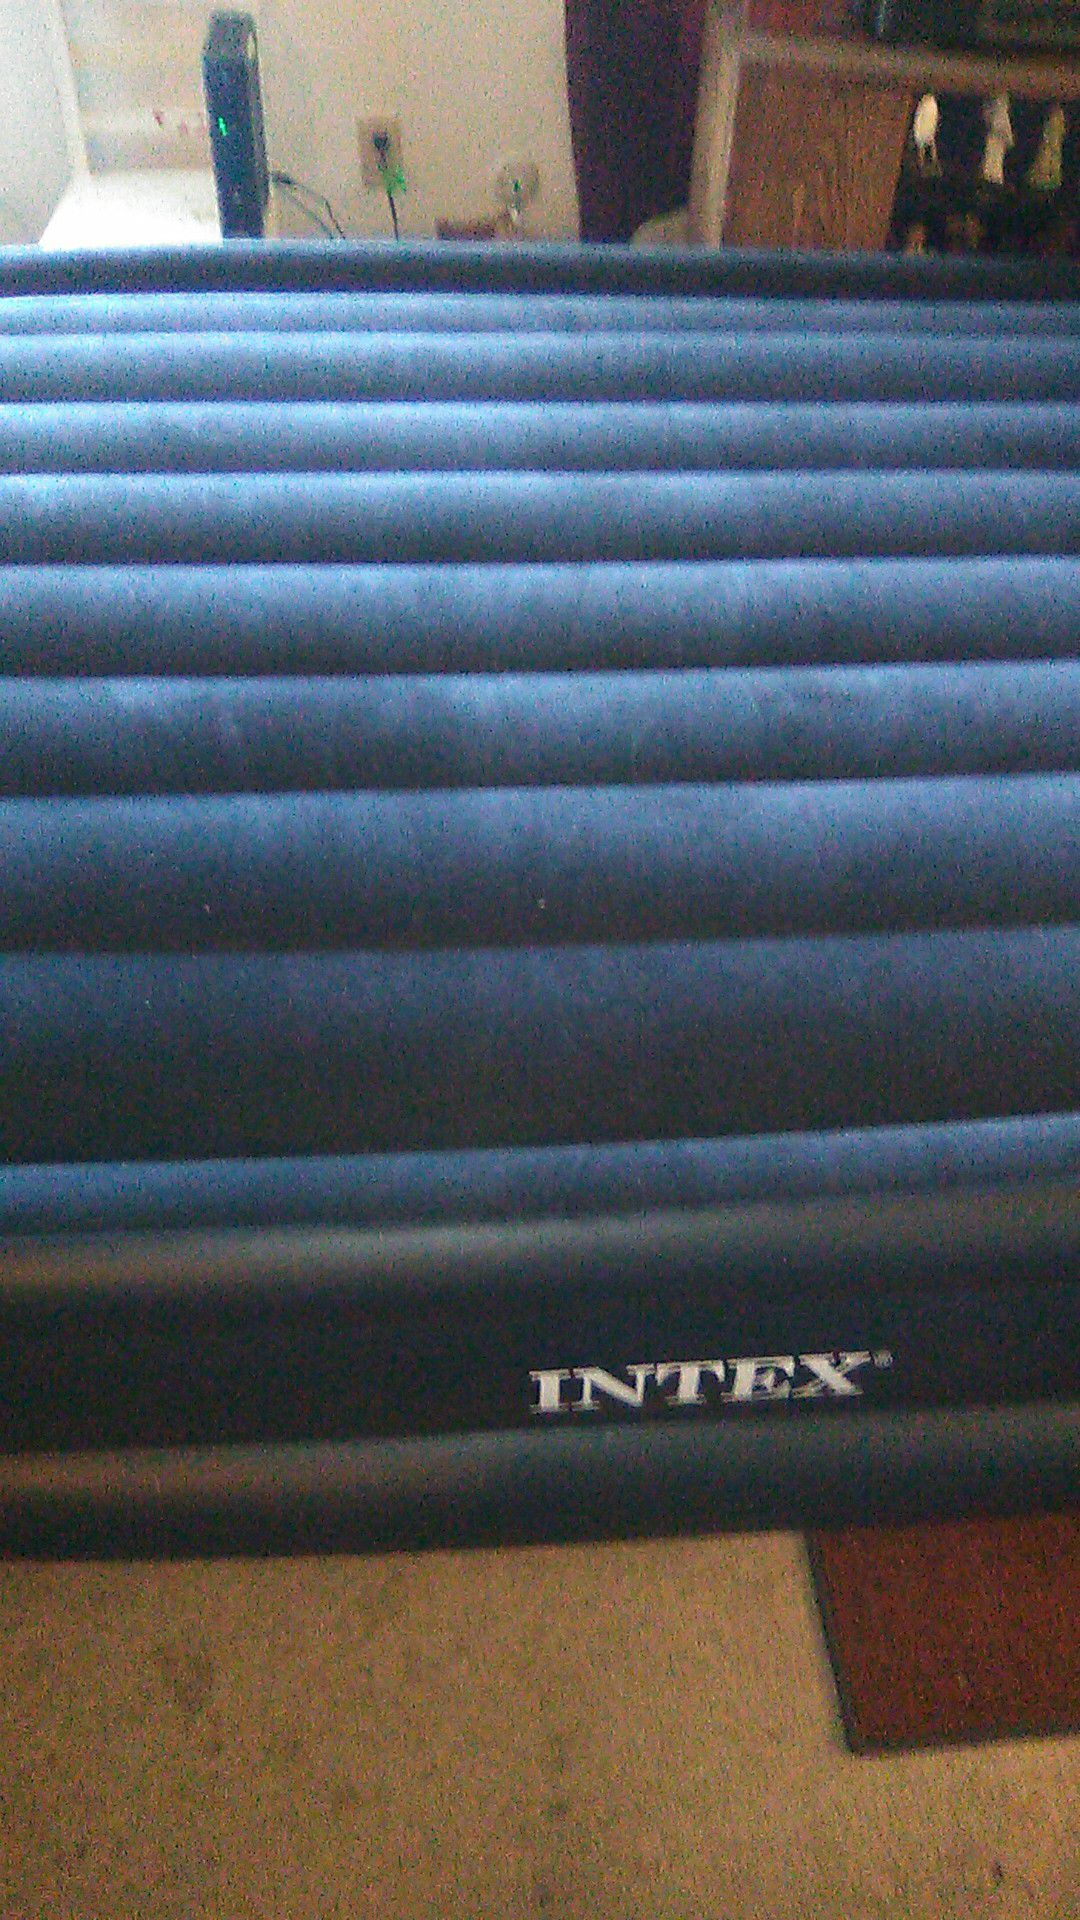 Intex rising comfort queen air bed in box never used